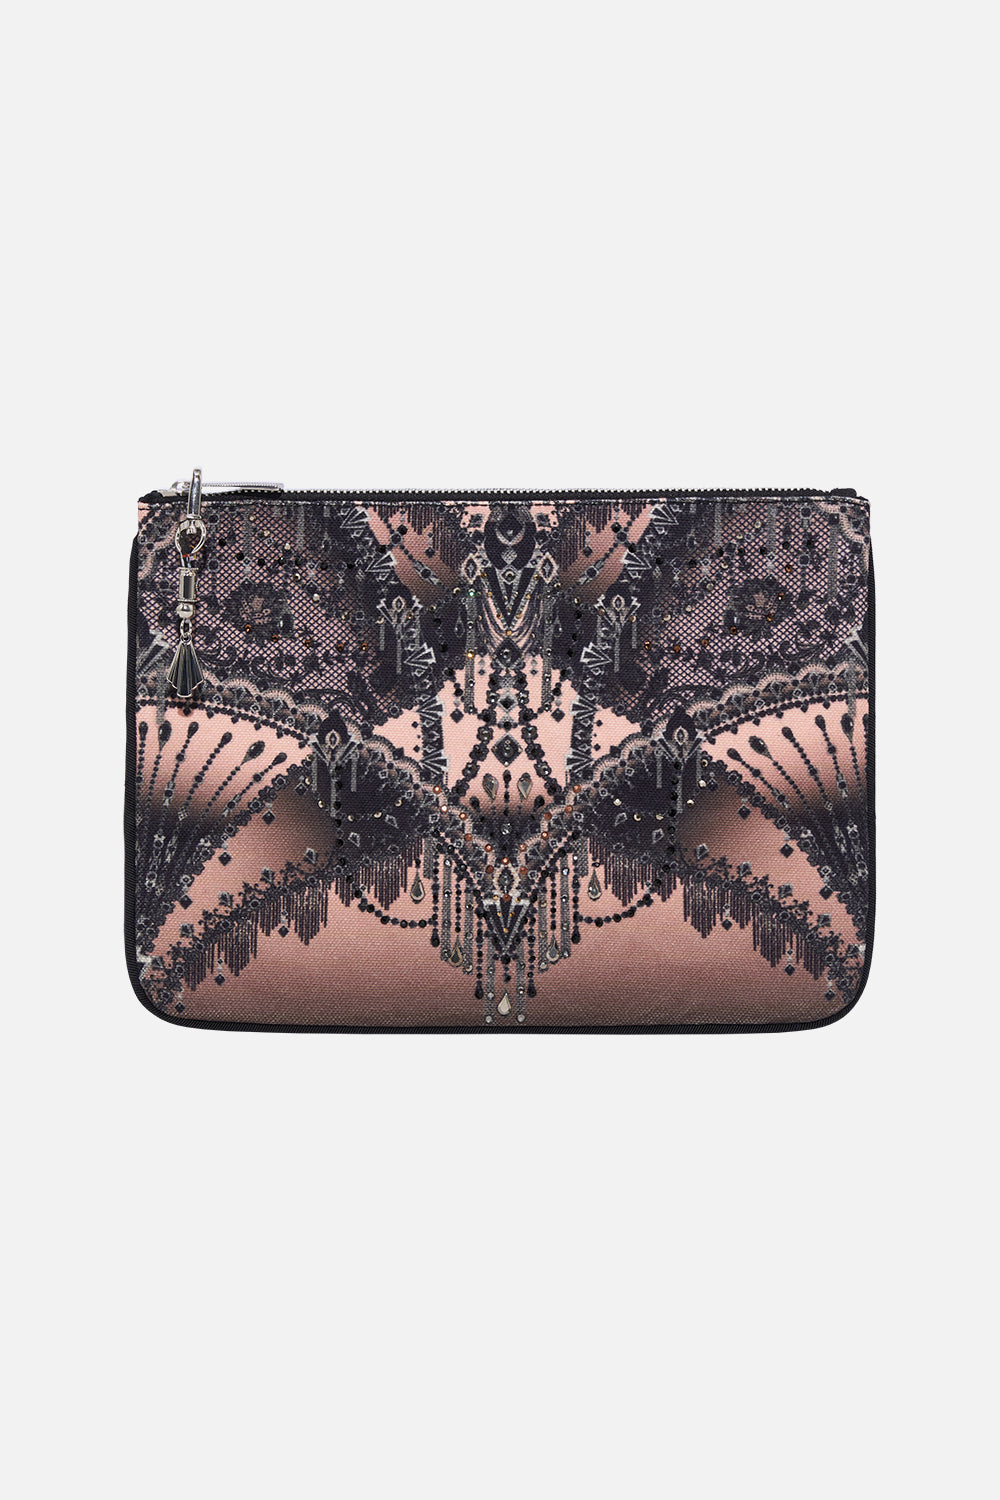 Product view of CAMILLA printed clutch bag in Curtain Call Chaos print